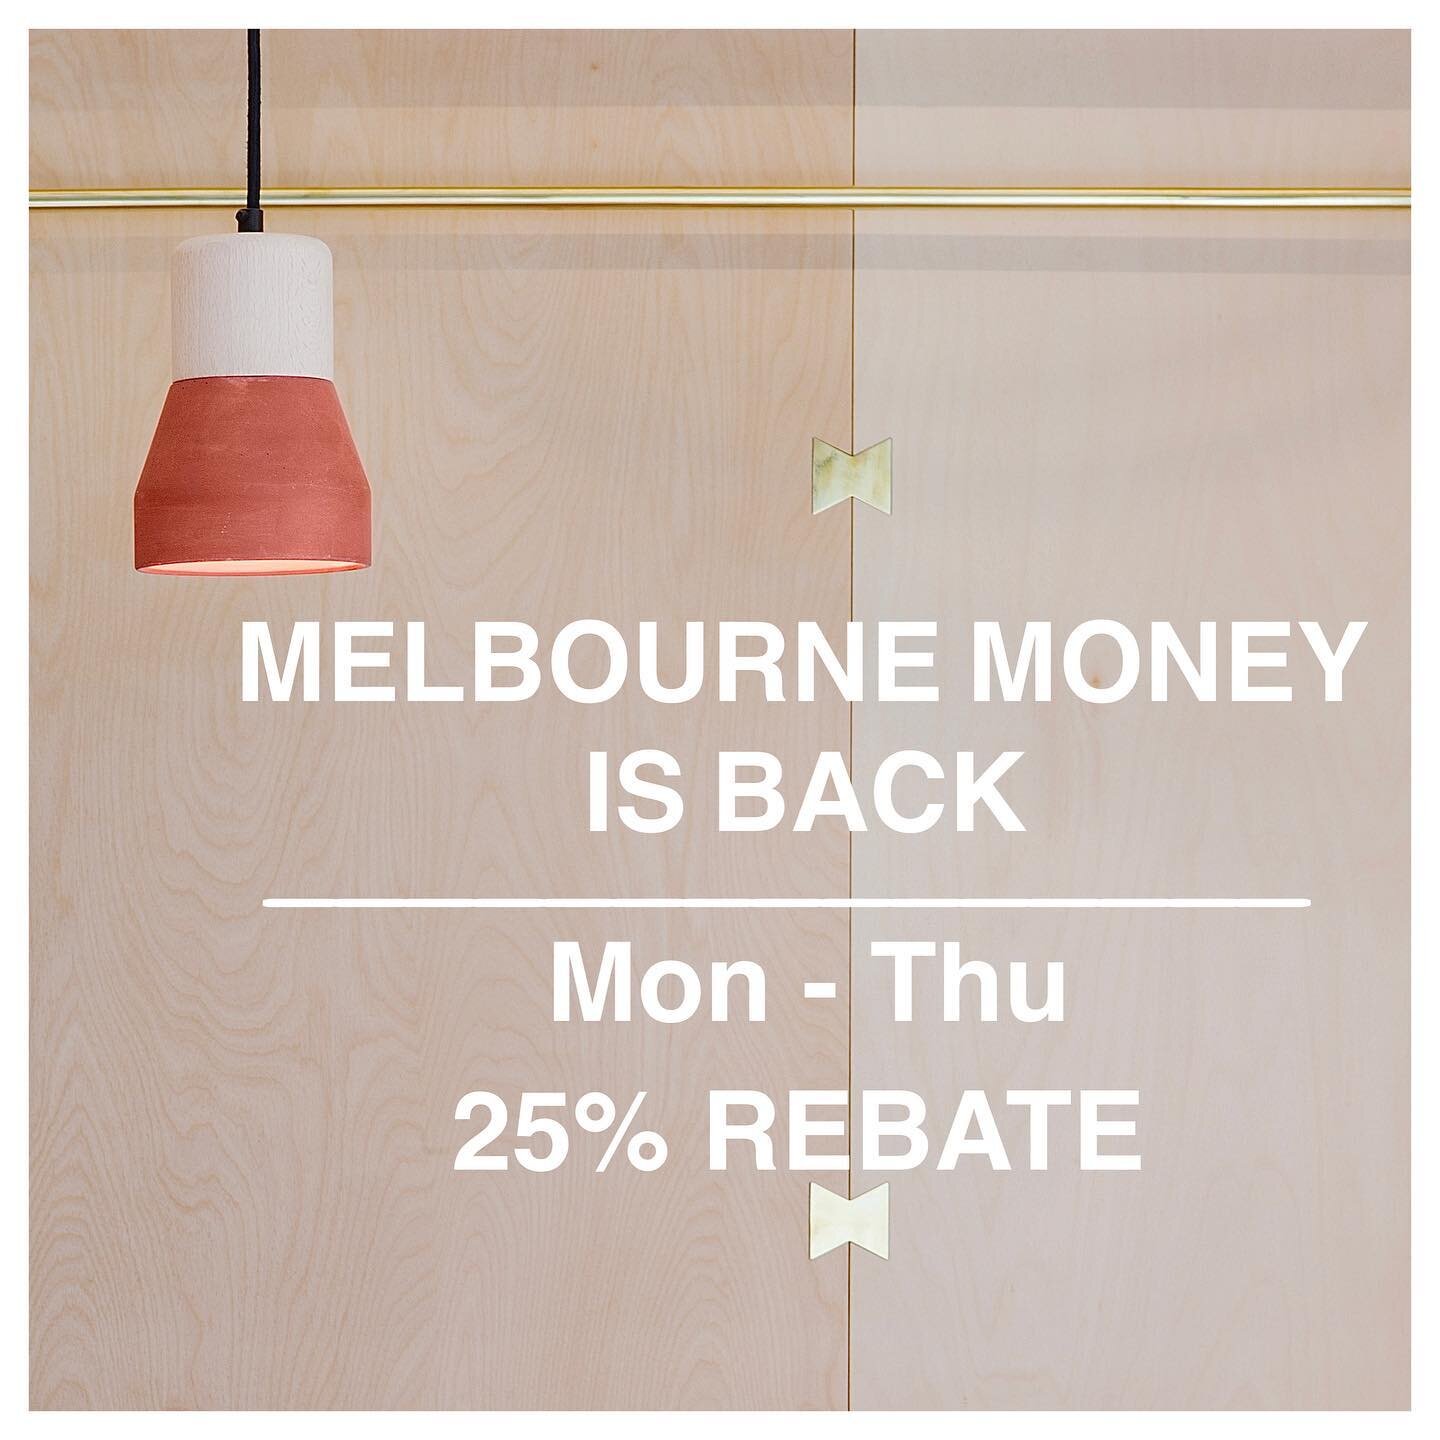 Hey Melbourne! Our wonderful mayor Sally Capp has announced:

&lsquo;From Monday 7 March, you&rsquo;ll be able to claim 25 per cent back on your bill when you spend between $40 and $500 in Melbourne&rsquo;s cafes, restaurants and bars between Monday 